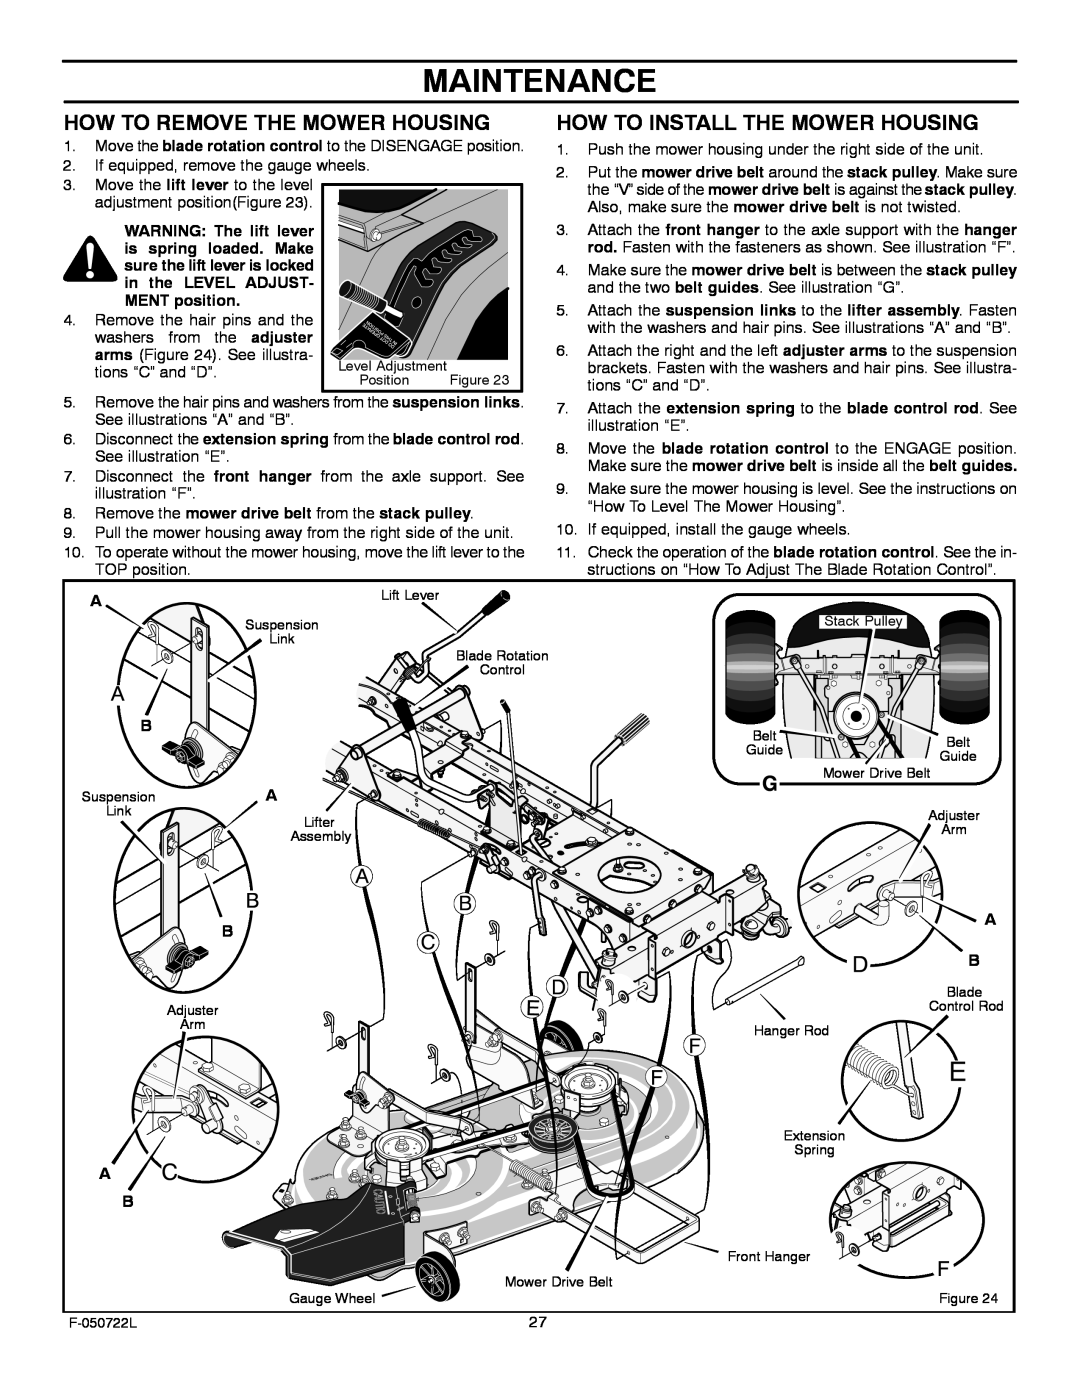 Murray 425001x99A manual Maintenance, How To Remove The Mower Housing, How To Install The Mower Housing 